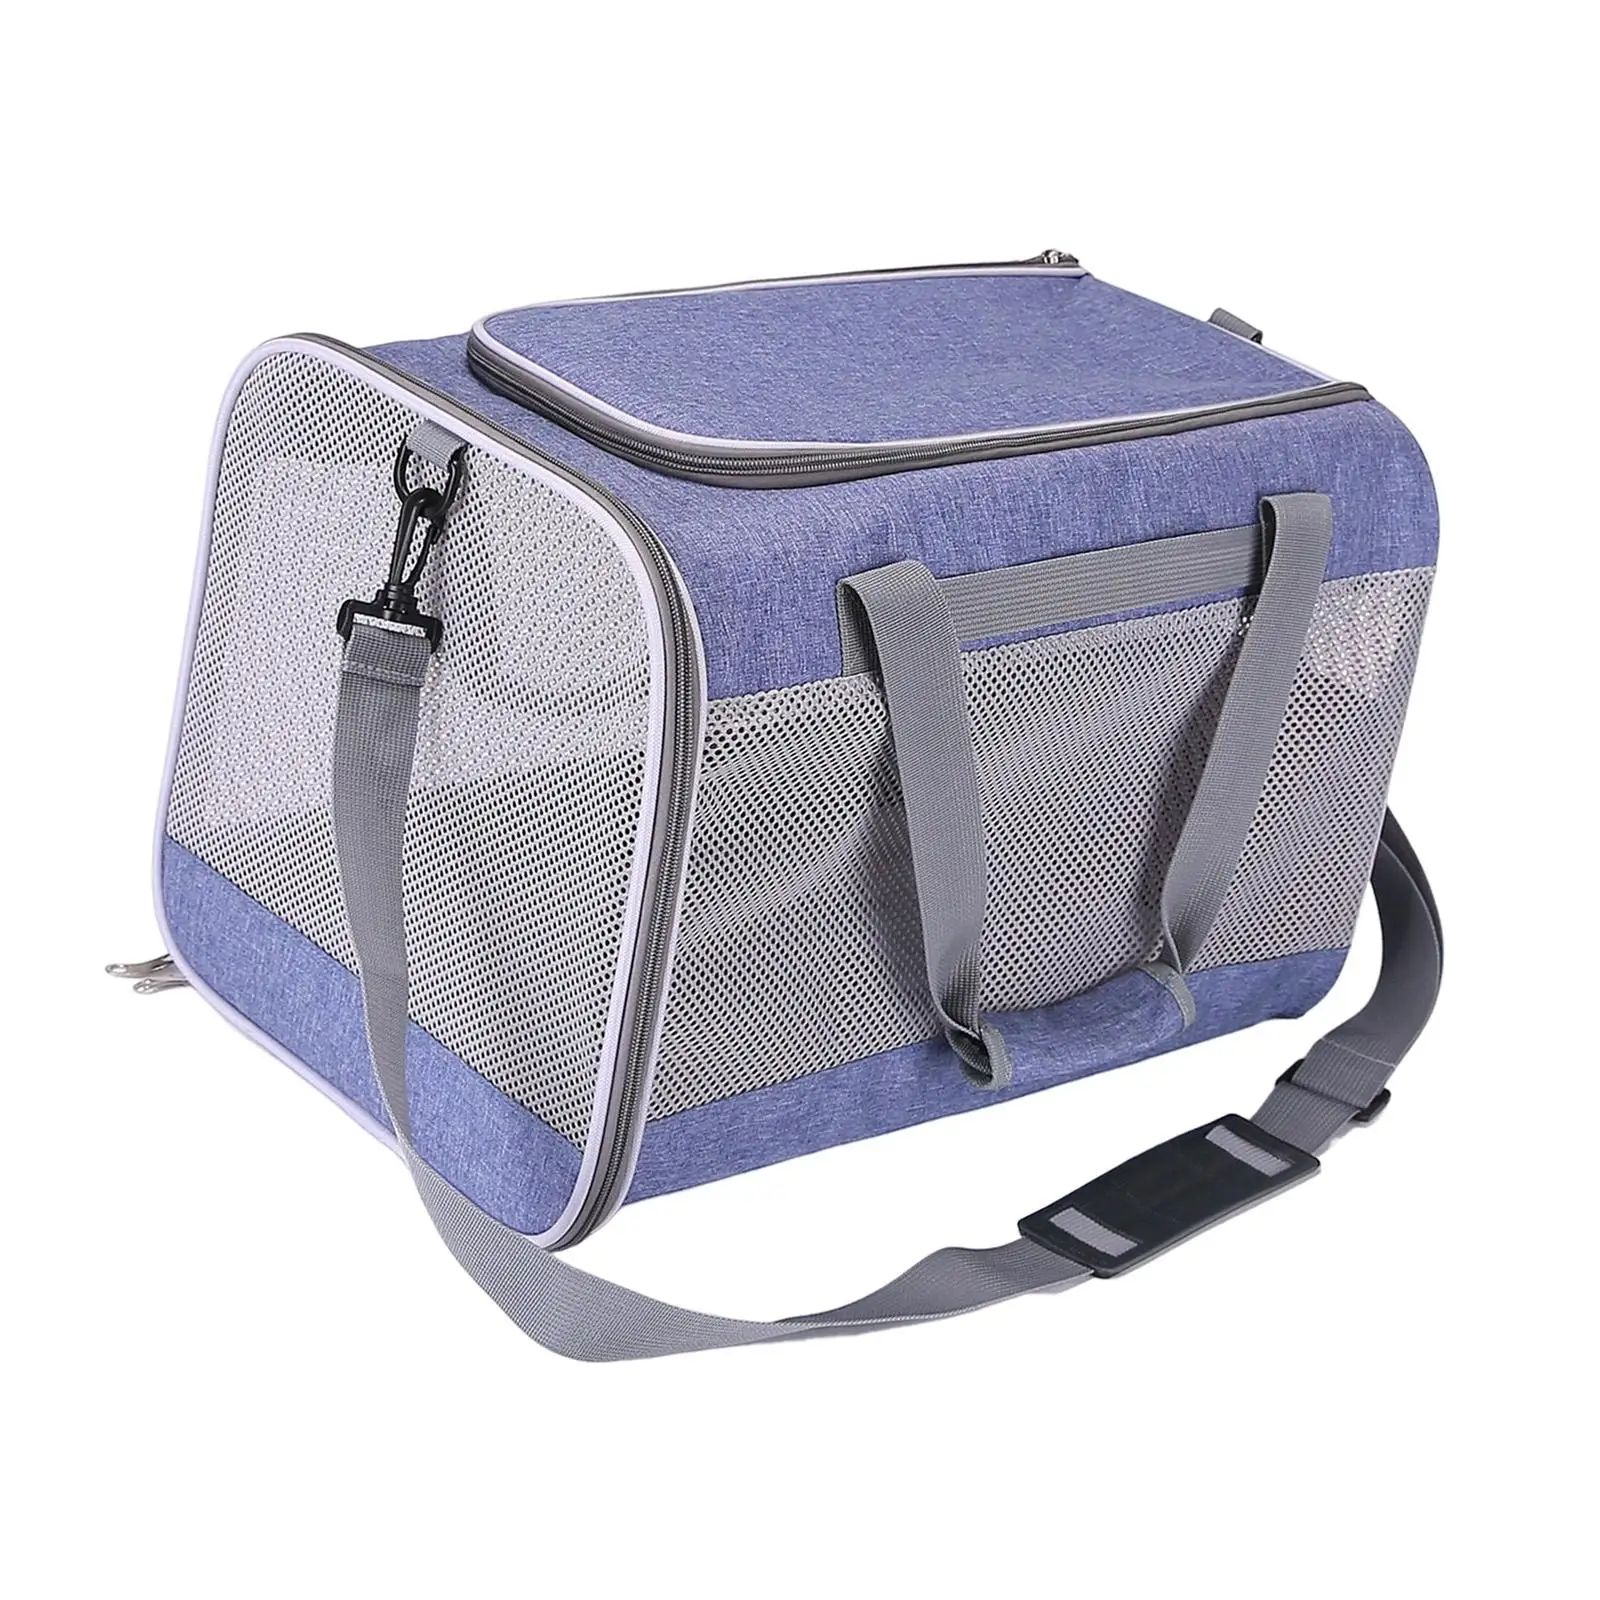 Cat Carrier Bag Comfortable Kitten Carriers Satchel Dog Carriers Purse Pet Travel Bag for Small Medium Dogs Cats Camping Outdoor